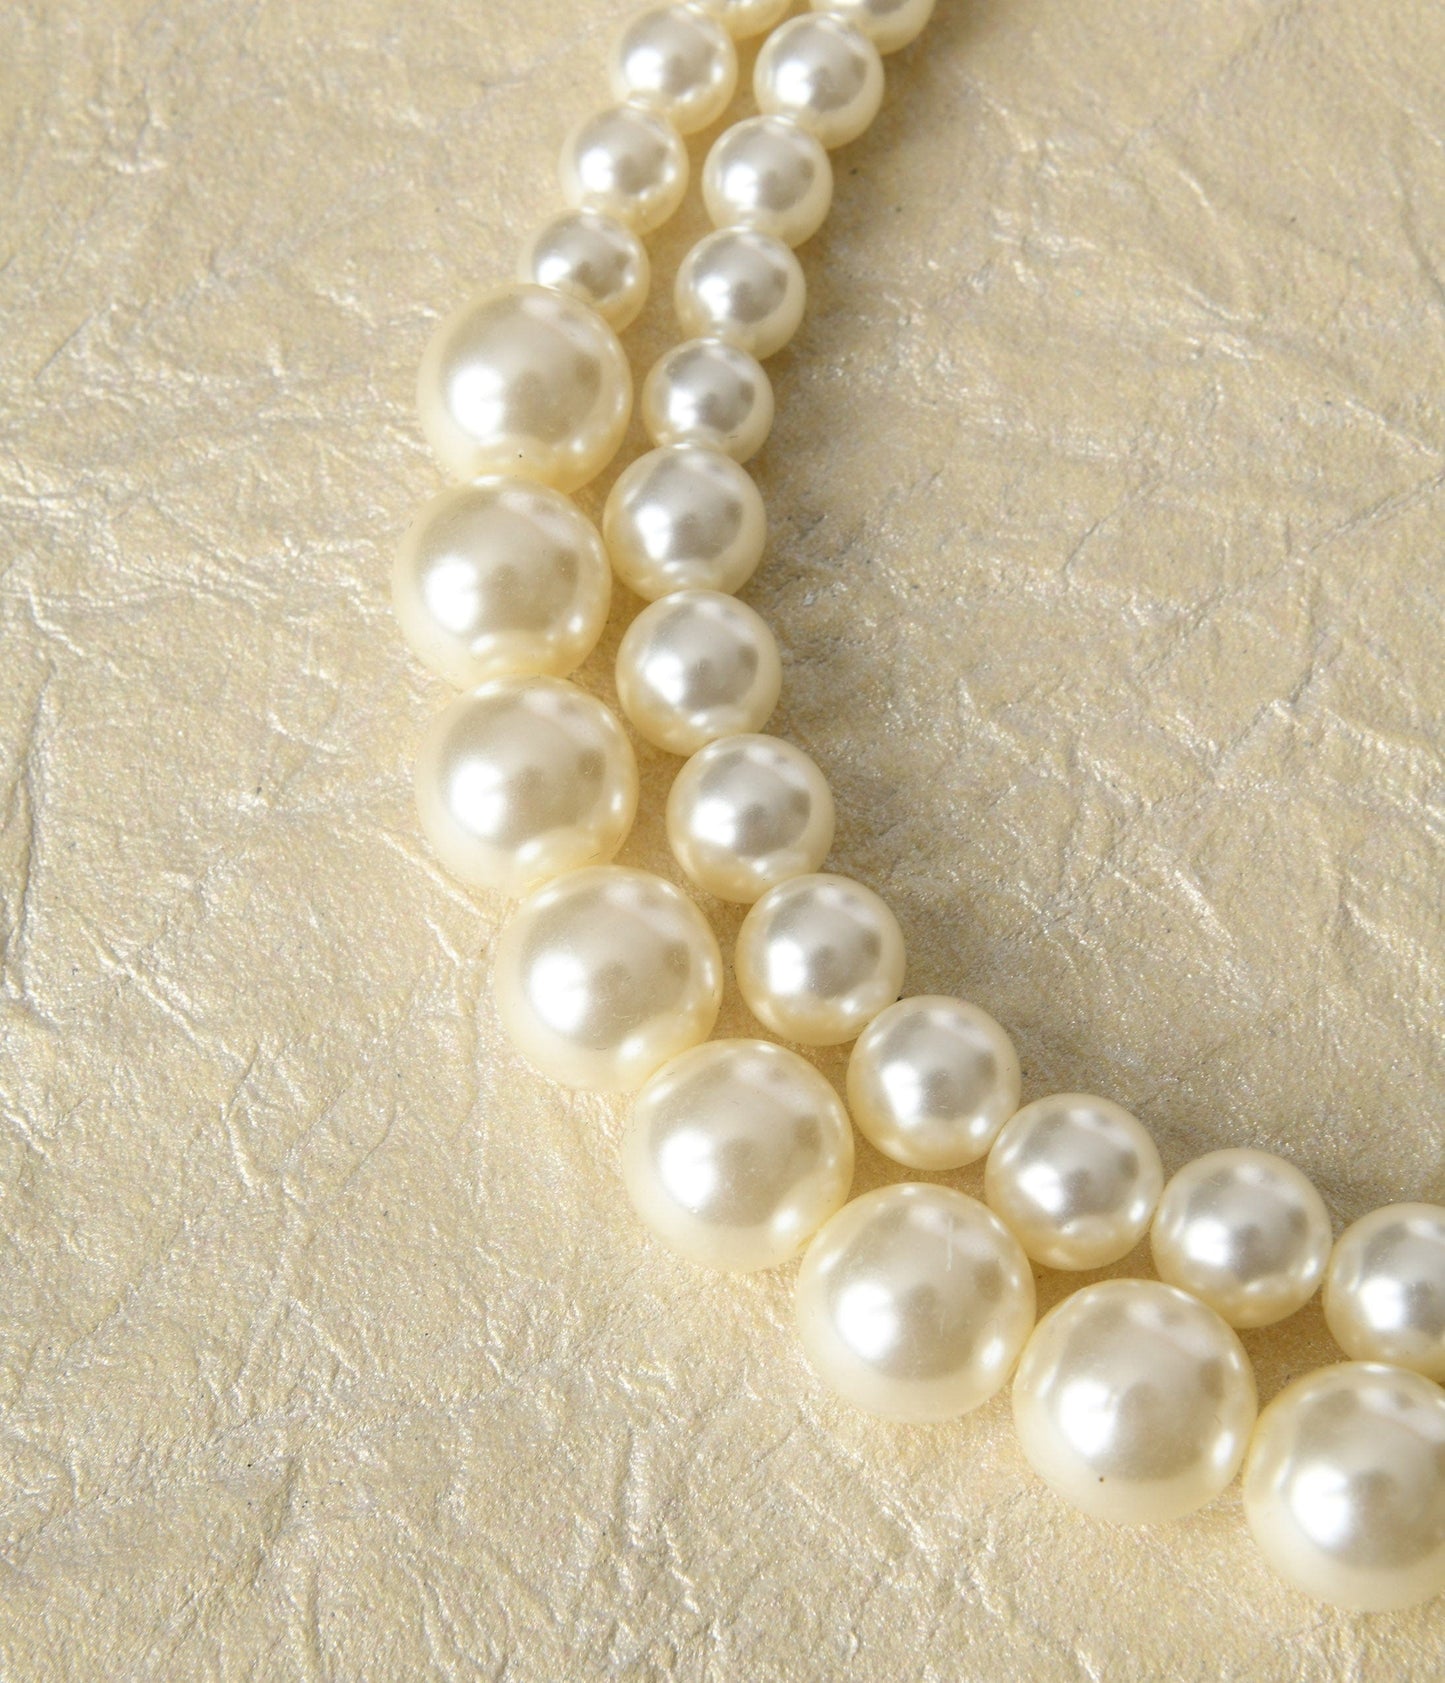 Dual Chunky Faux Pearl Necklace